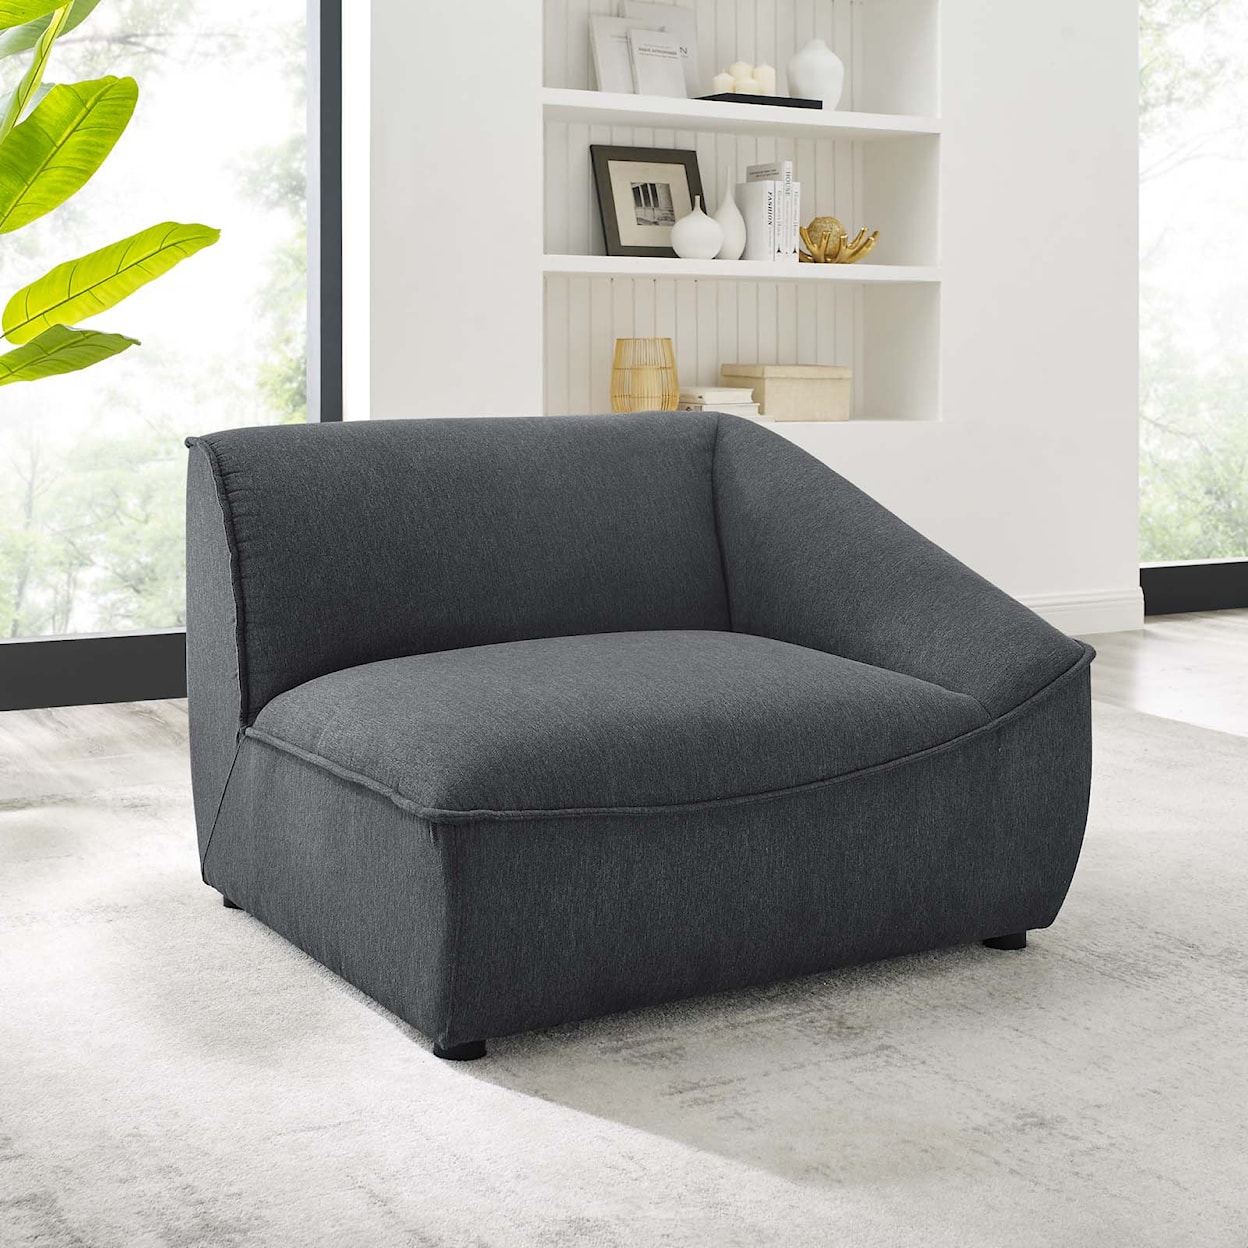 Modway Comprise Right-Arm Sectional Sofa Chair